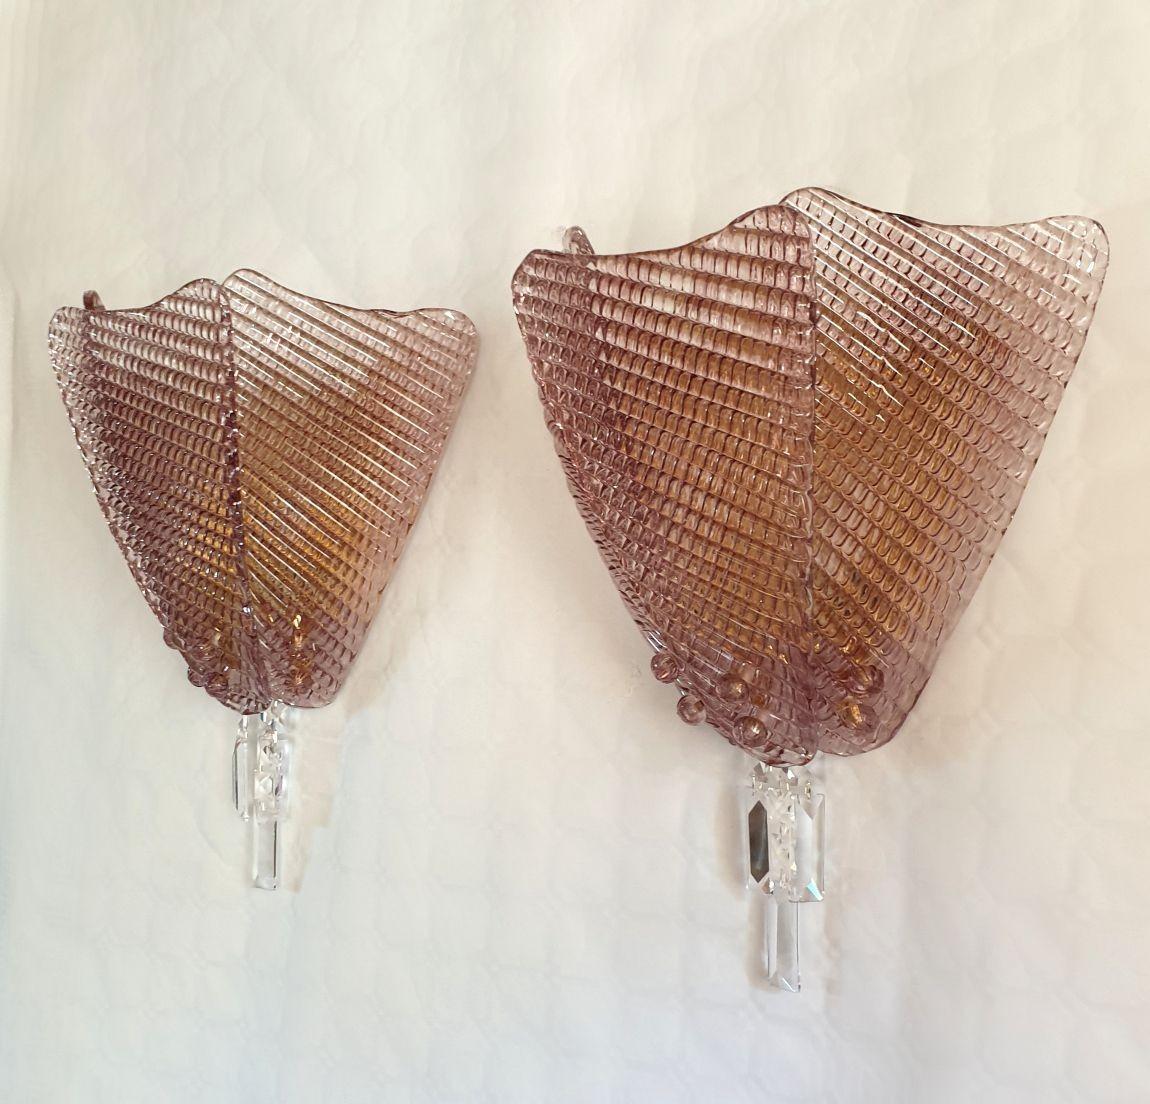 Pair of large Murano glass wall sconces, Mid-Century Modern, Italy 1980s.
The sconces are attributed to Vistosi.
The sconces are made of 3 stylized light purple leaves, brass finish mounts and decorative crystals.
The Murano glass is translucent,